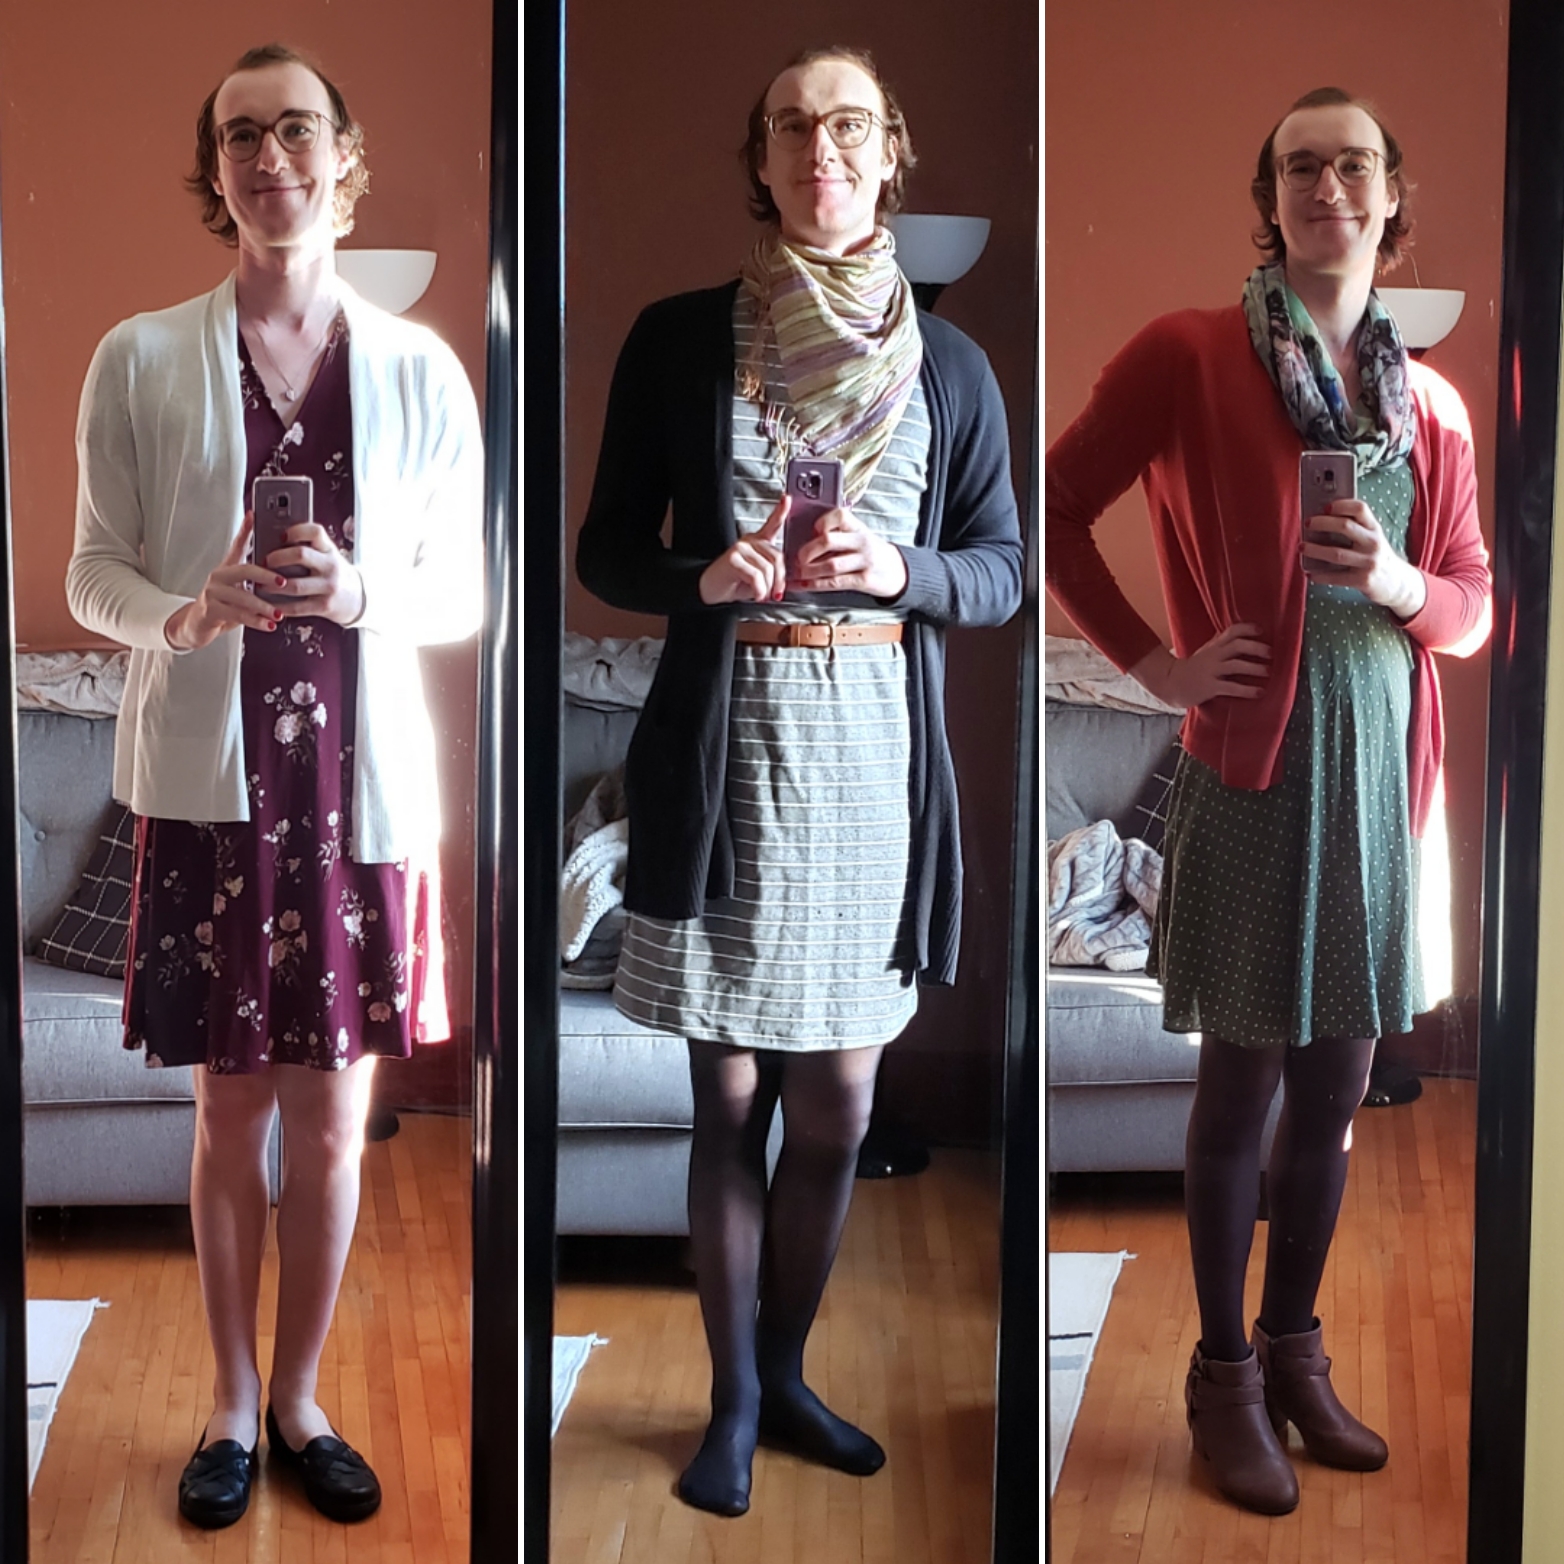 Photo of the 3 outfits I wore. The first is a burgundy dress with a floral motif, along with a white cardigan; the second is a grey and white striped sheathe dress with a black cardigan; the third is a green cami dress with white polka dots and an orange cardigan.